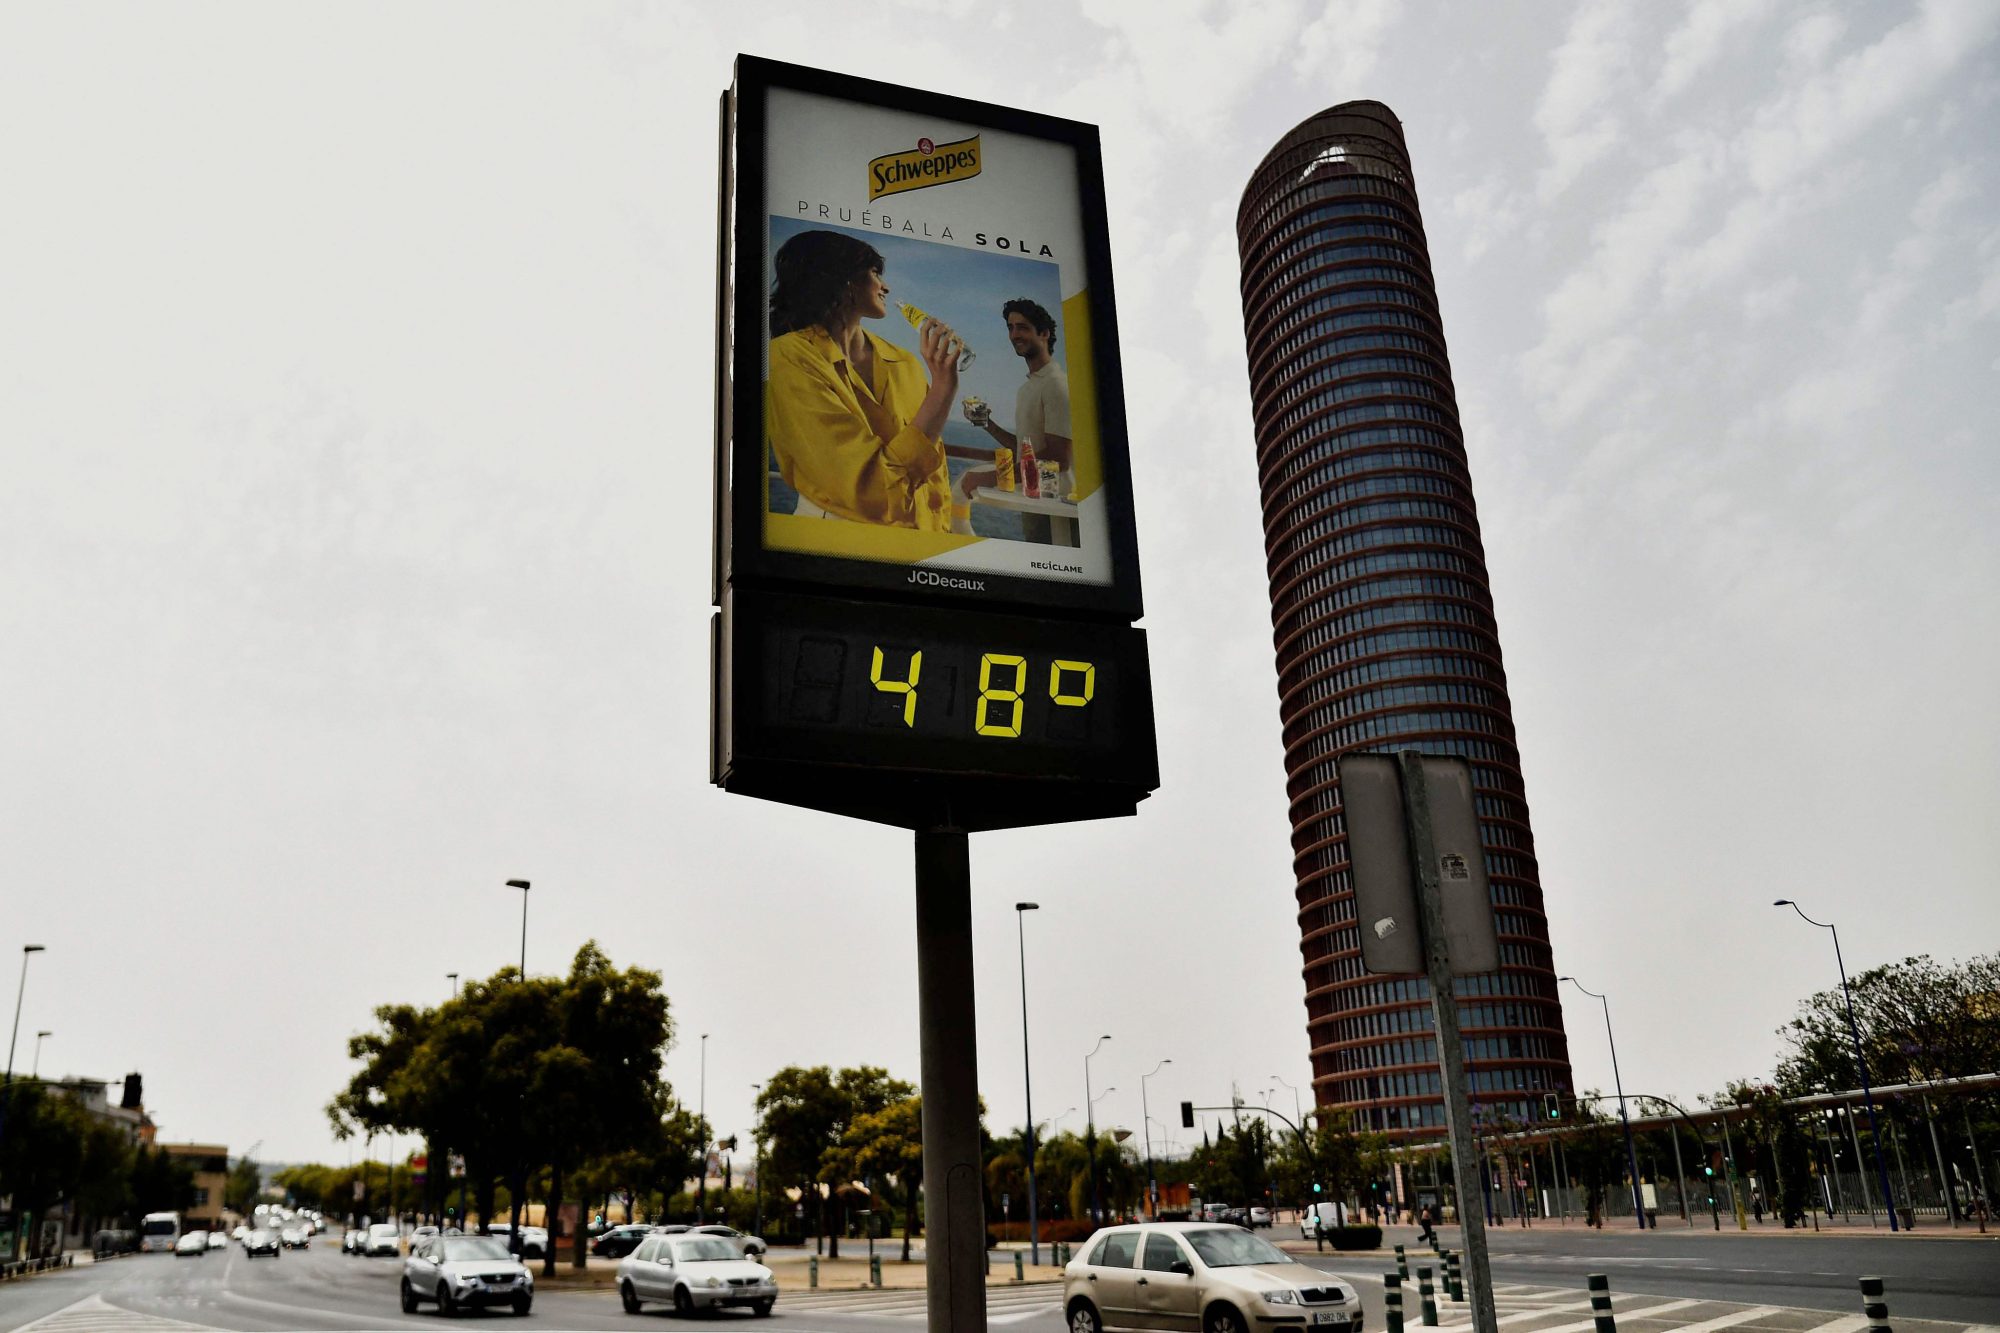 (FILES) In this file photo taken on June 13, 2022 a street thermometer reads 48 degrees Celsius during a heatwave in Seville. - In the midst of Europe's heatwaves, social networks have seen a surge in posts showing previous temperature extremes in an attempt to deny global warming, but this data does not contradict the phenomenon, experts say. (Photo by CRISTINA QUICLER / AFP) (Photo by CRISTINA QUICLER/AFP via Getty Images)